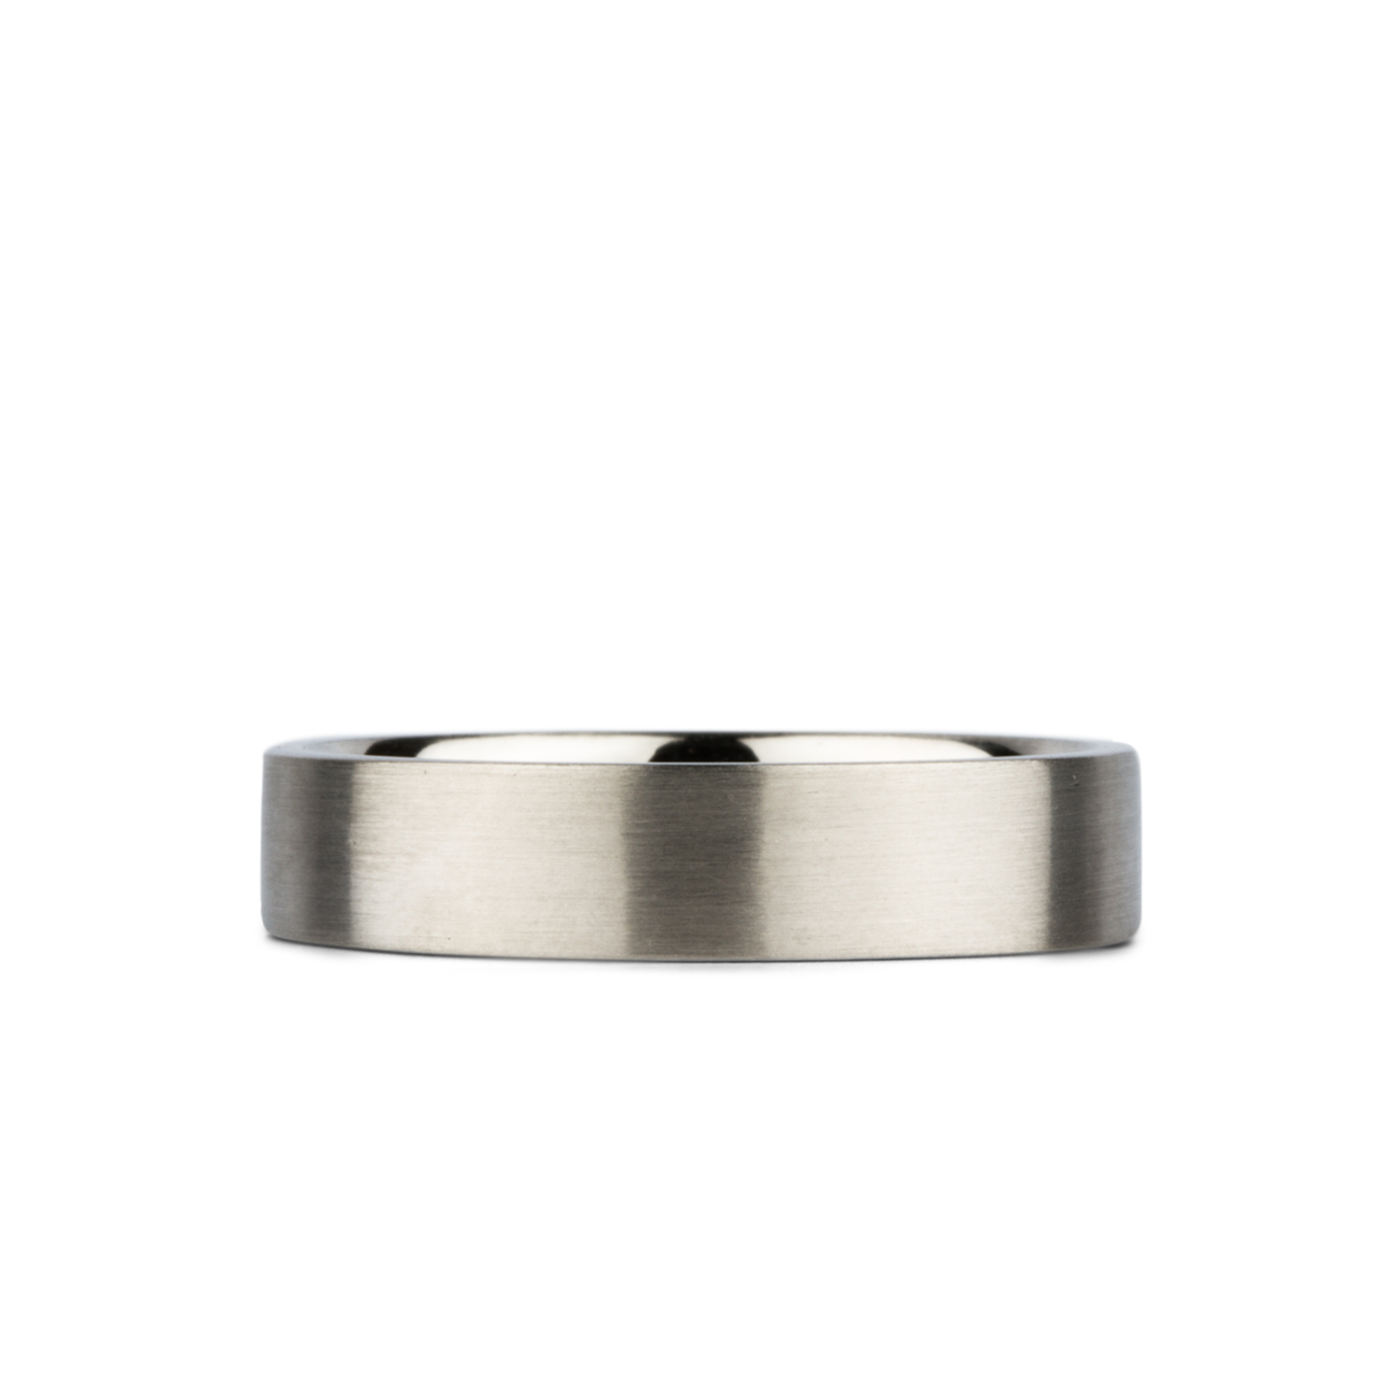 5mm Wide Diablo flat brushed white gold wedding band on a white background by Corey Egan